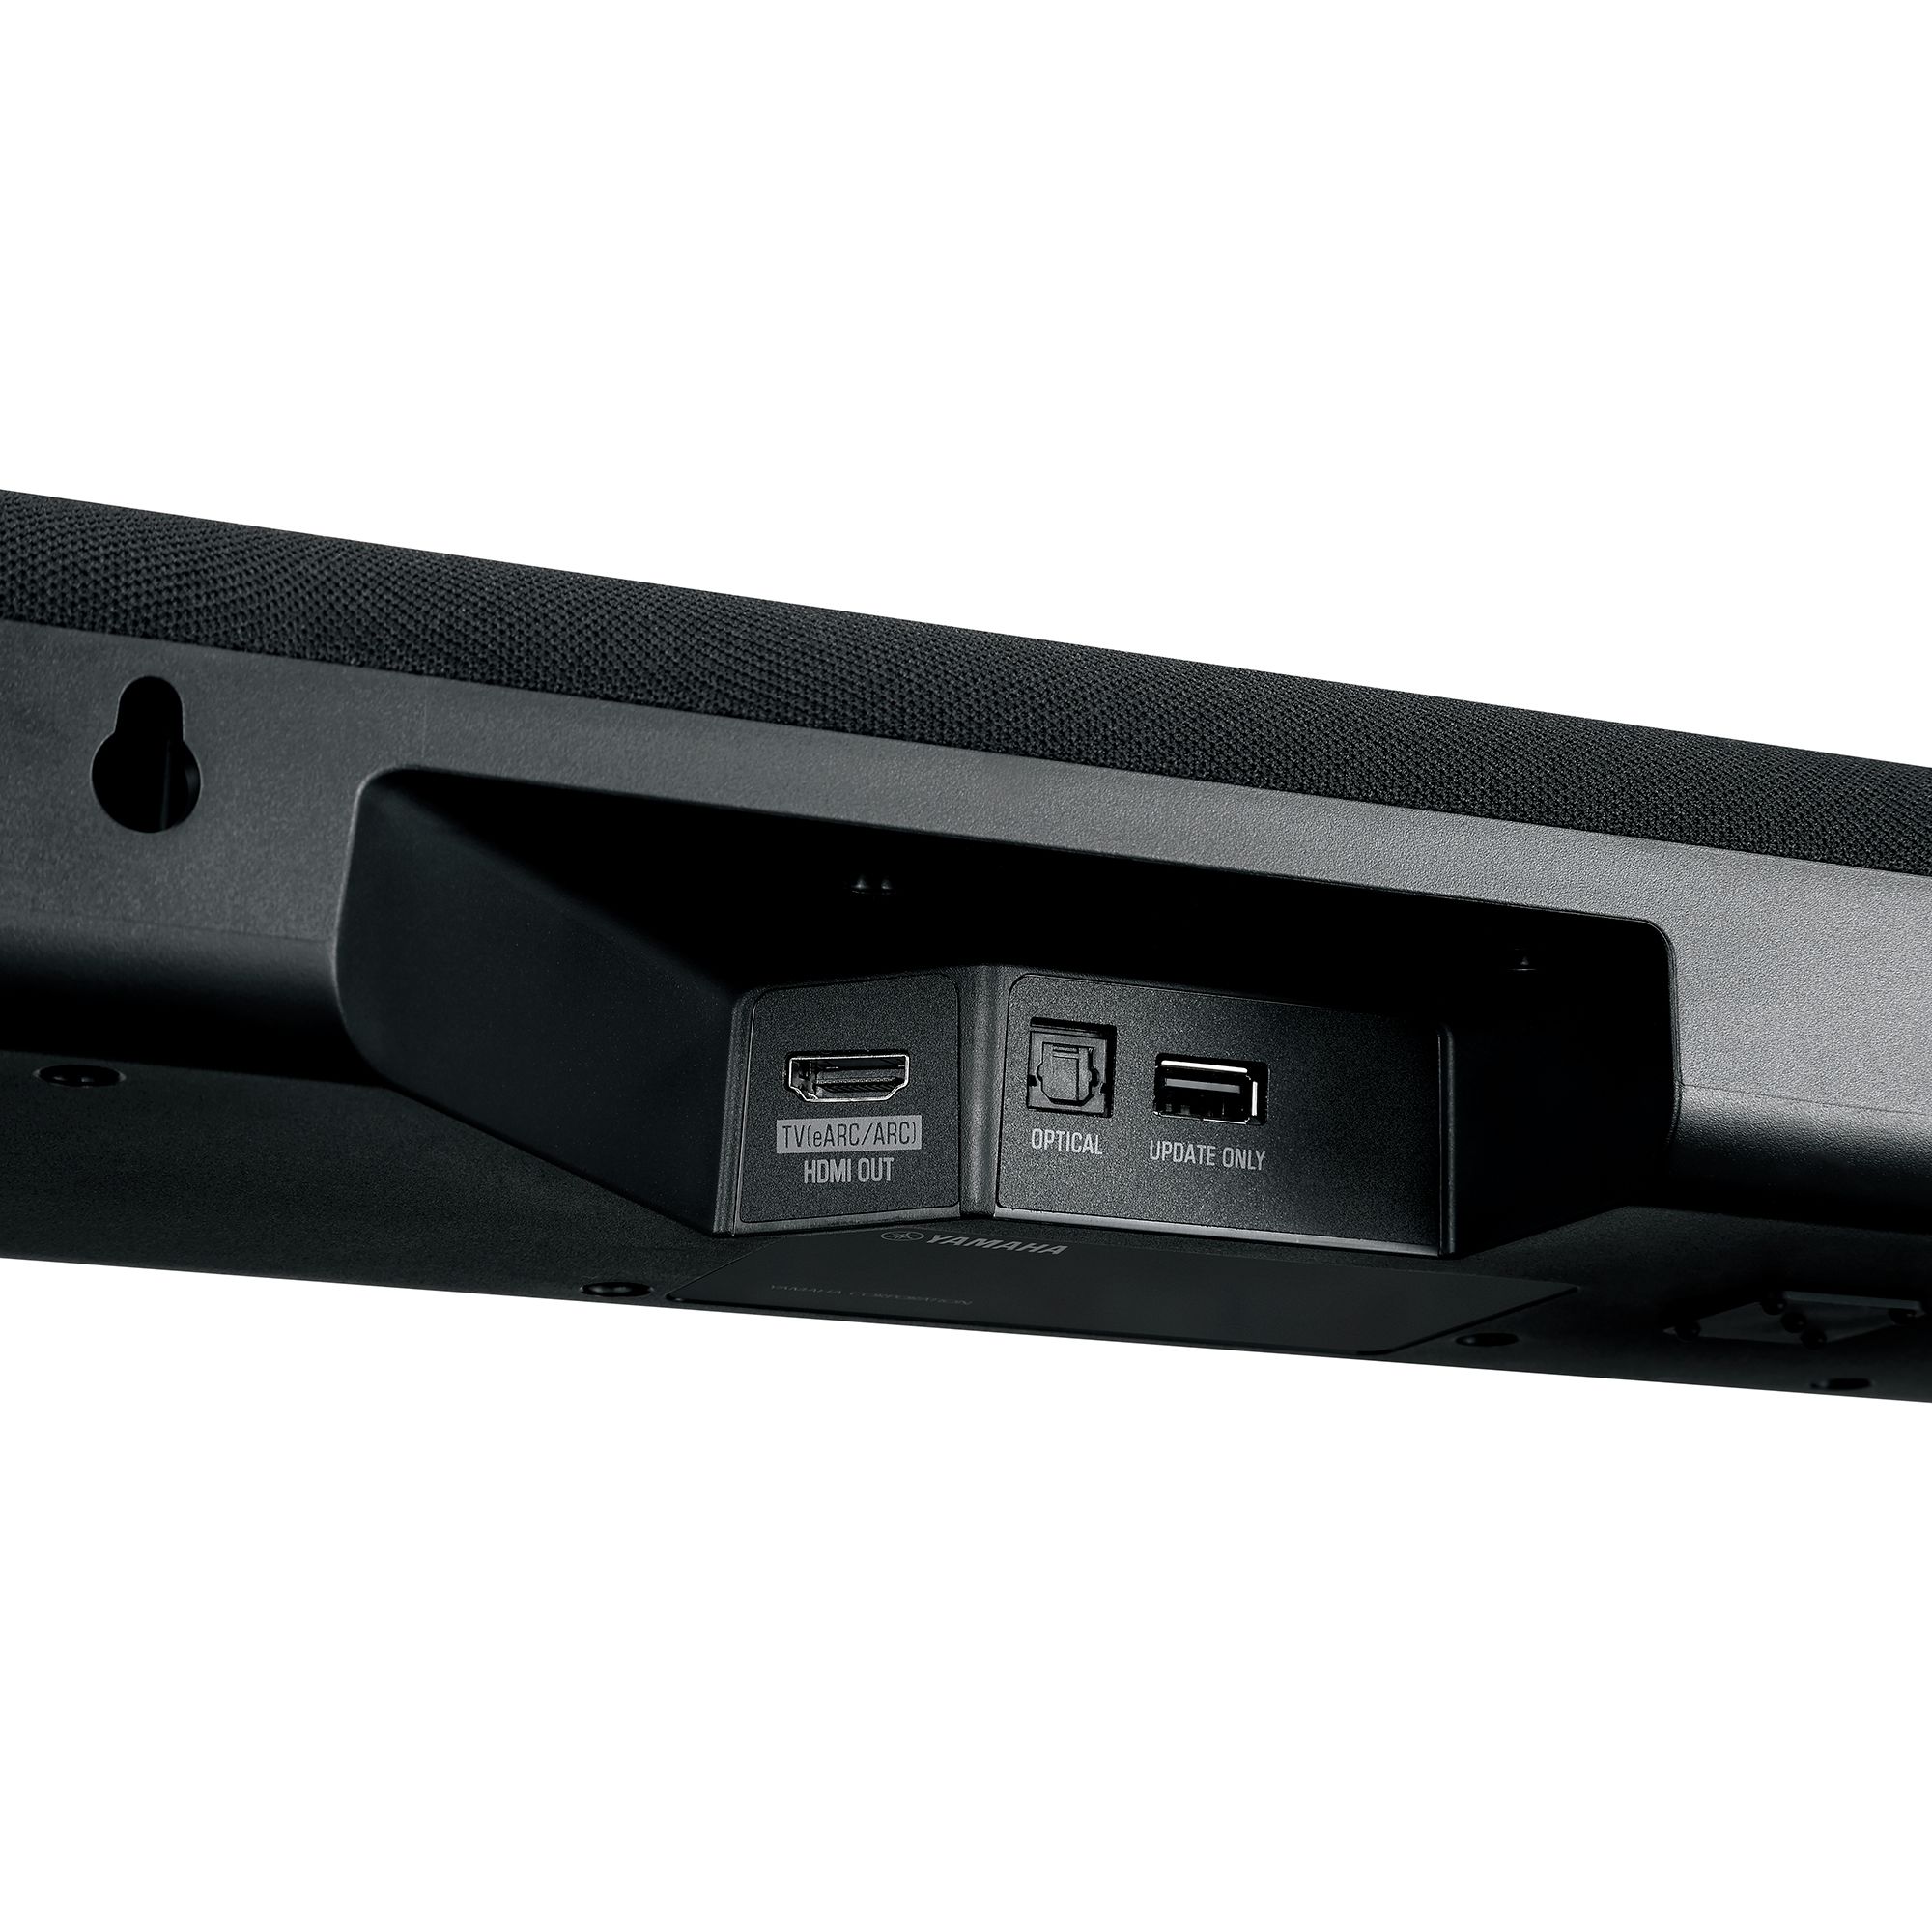 SR-B40A - Overview - Sound Bar - Audio & Visual - Products 